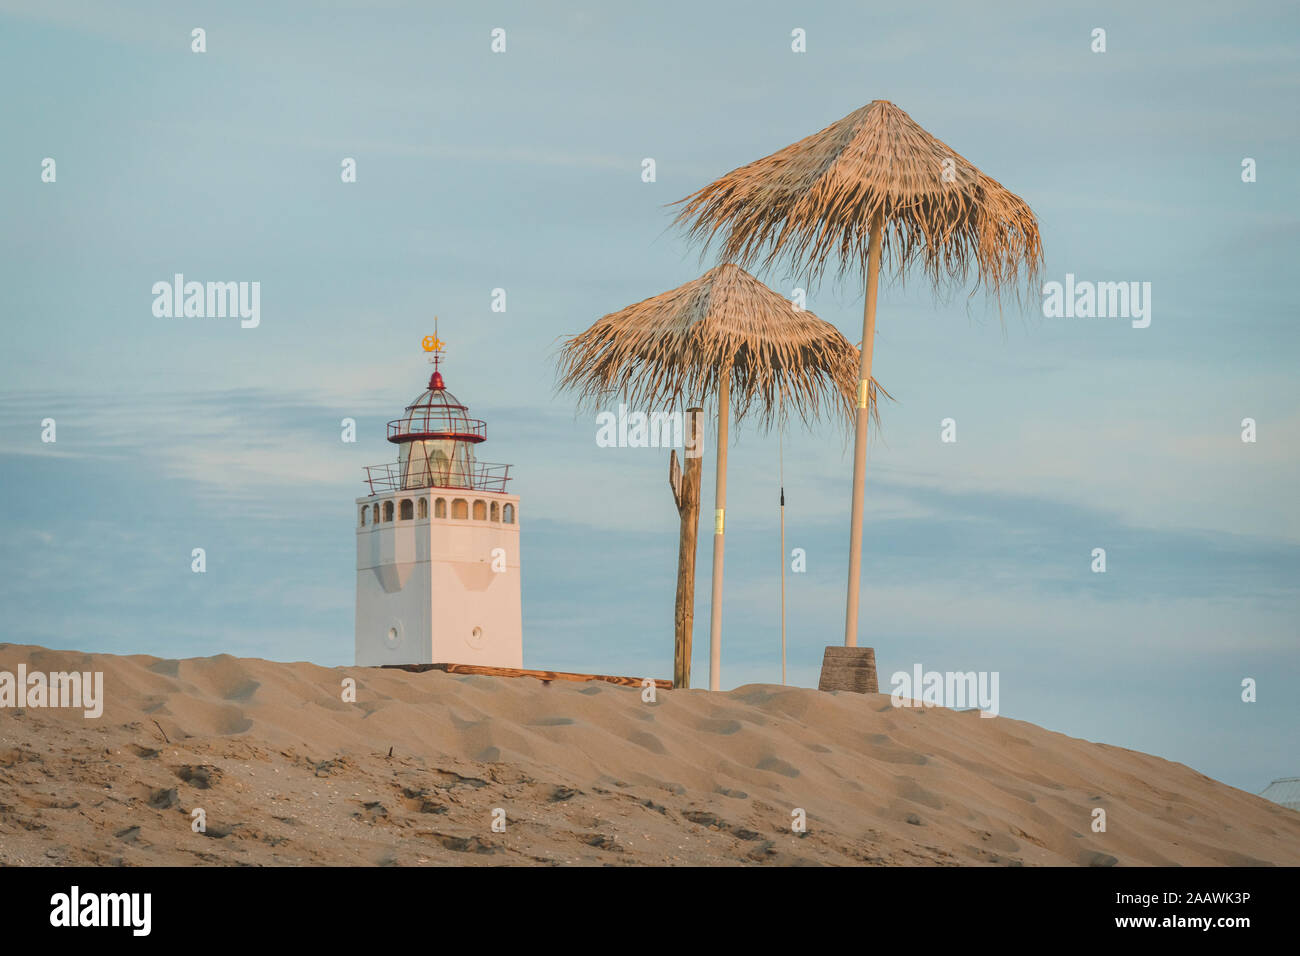 Netherlands, South Holland, Noordwijk, lighthouse and sun shades on sandy beach Stock Photo